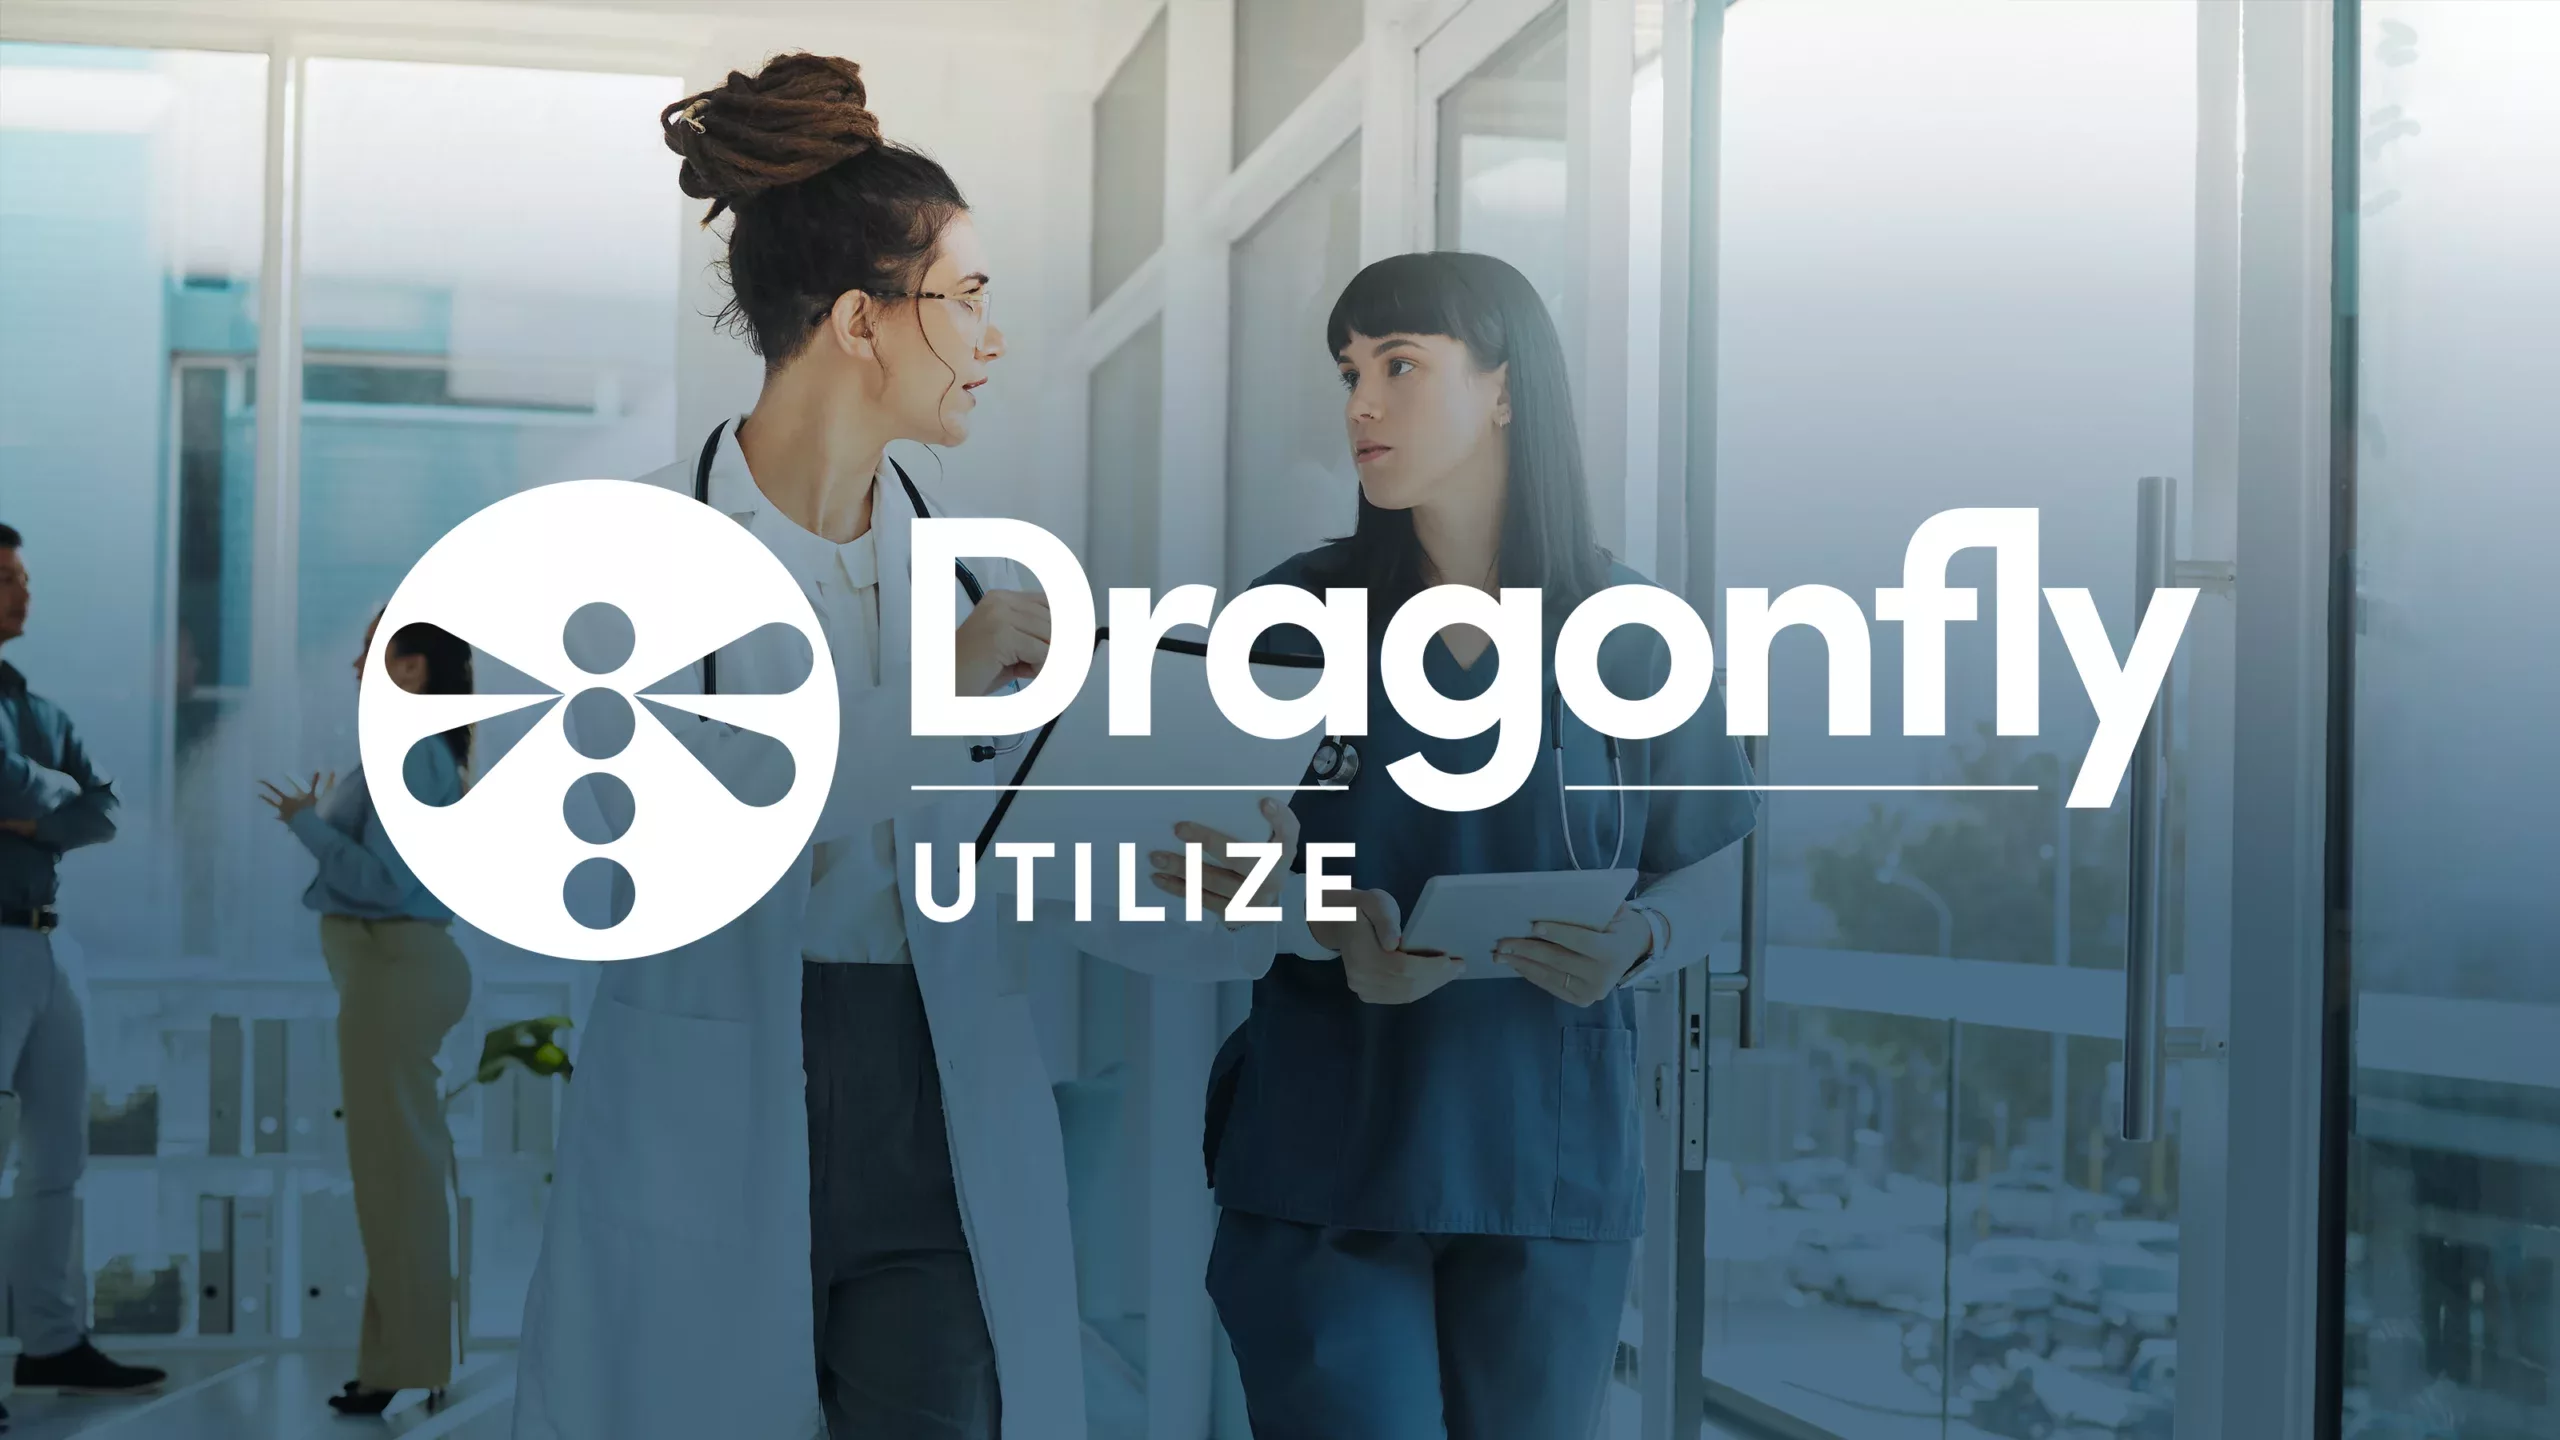 Xsolis Dragonfly Utilize logo over hospital providers